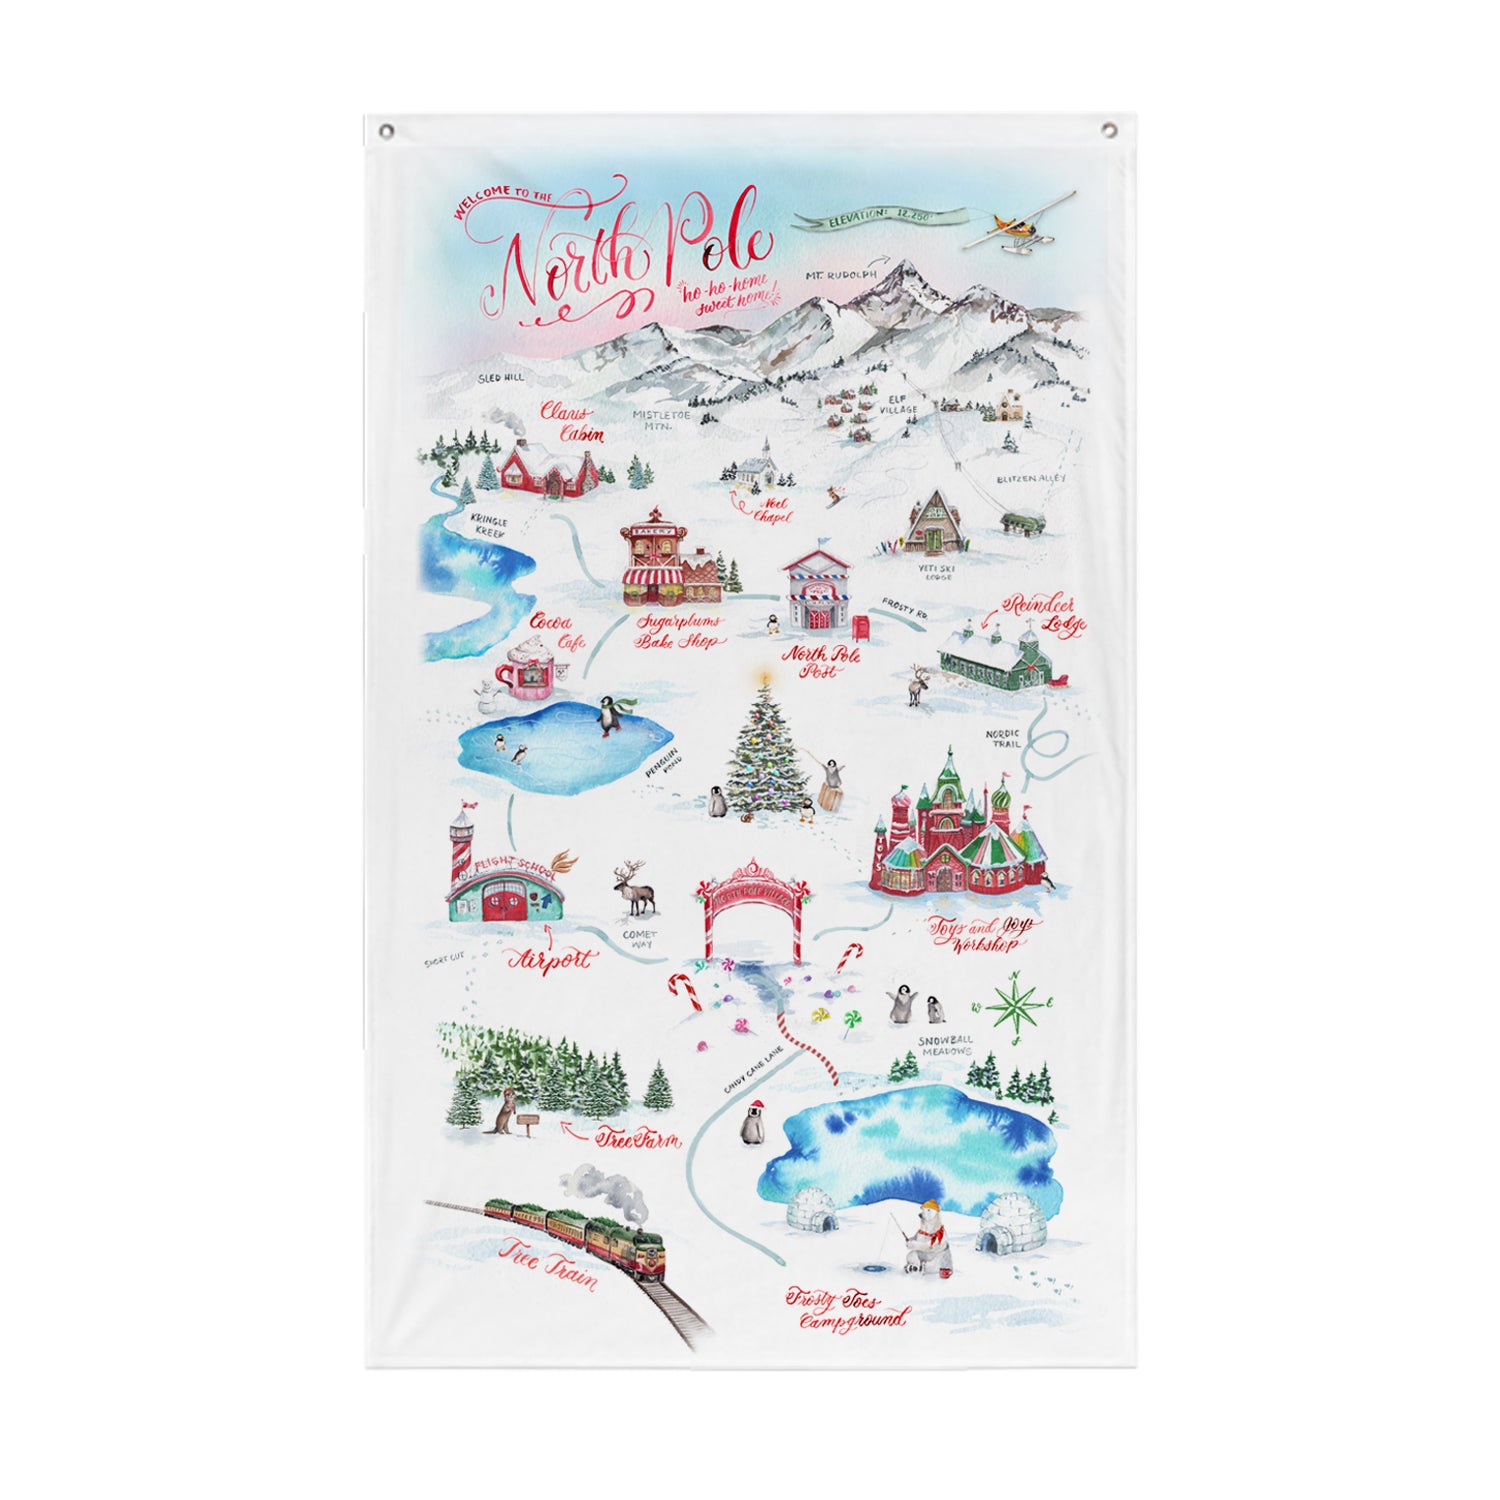 North Pole Extra-Large Wall Hanging Flag